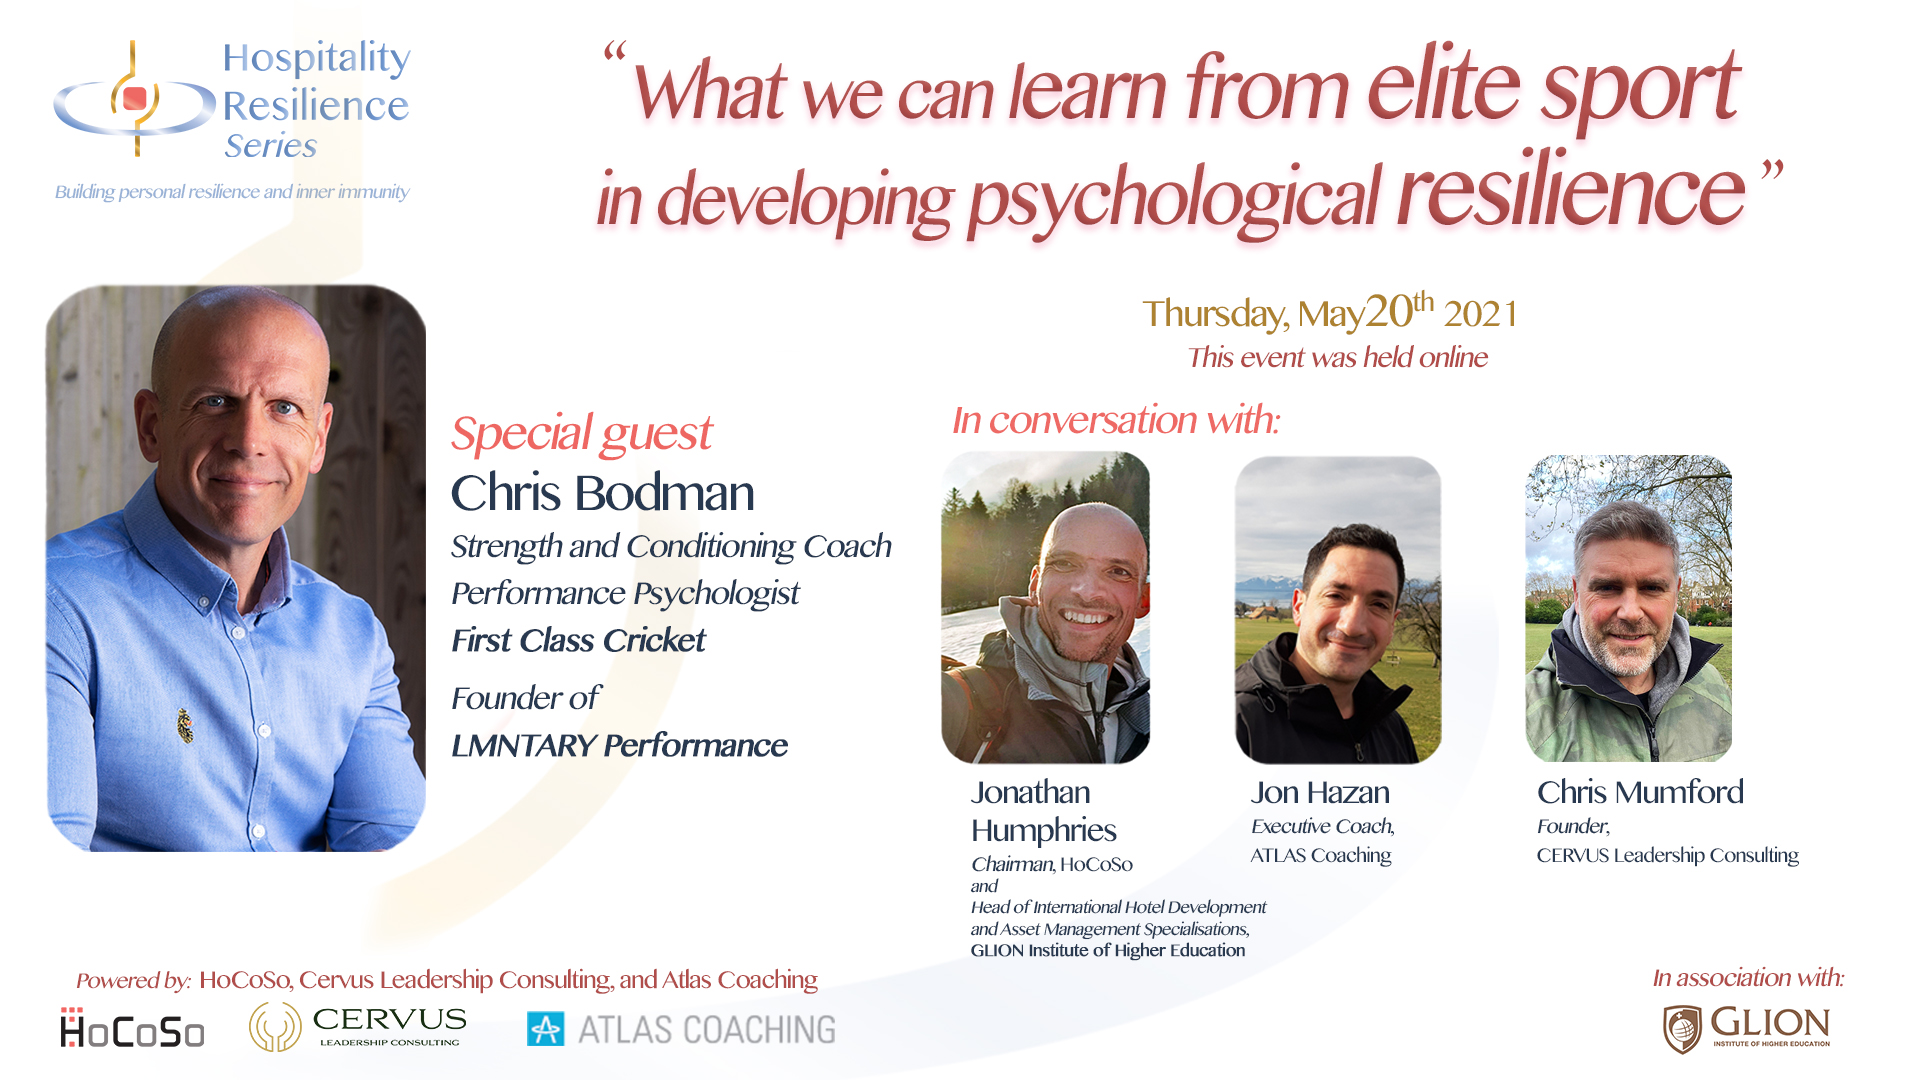 What we can learn from elite sport in developing psychological performance - Chris Bodman for the Hospitality Resilience Series